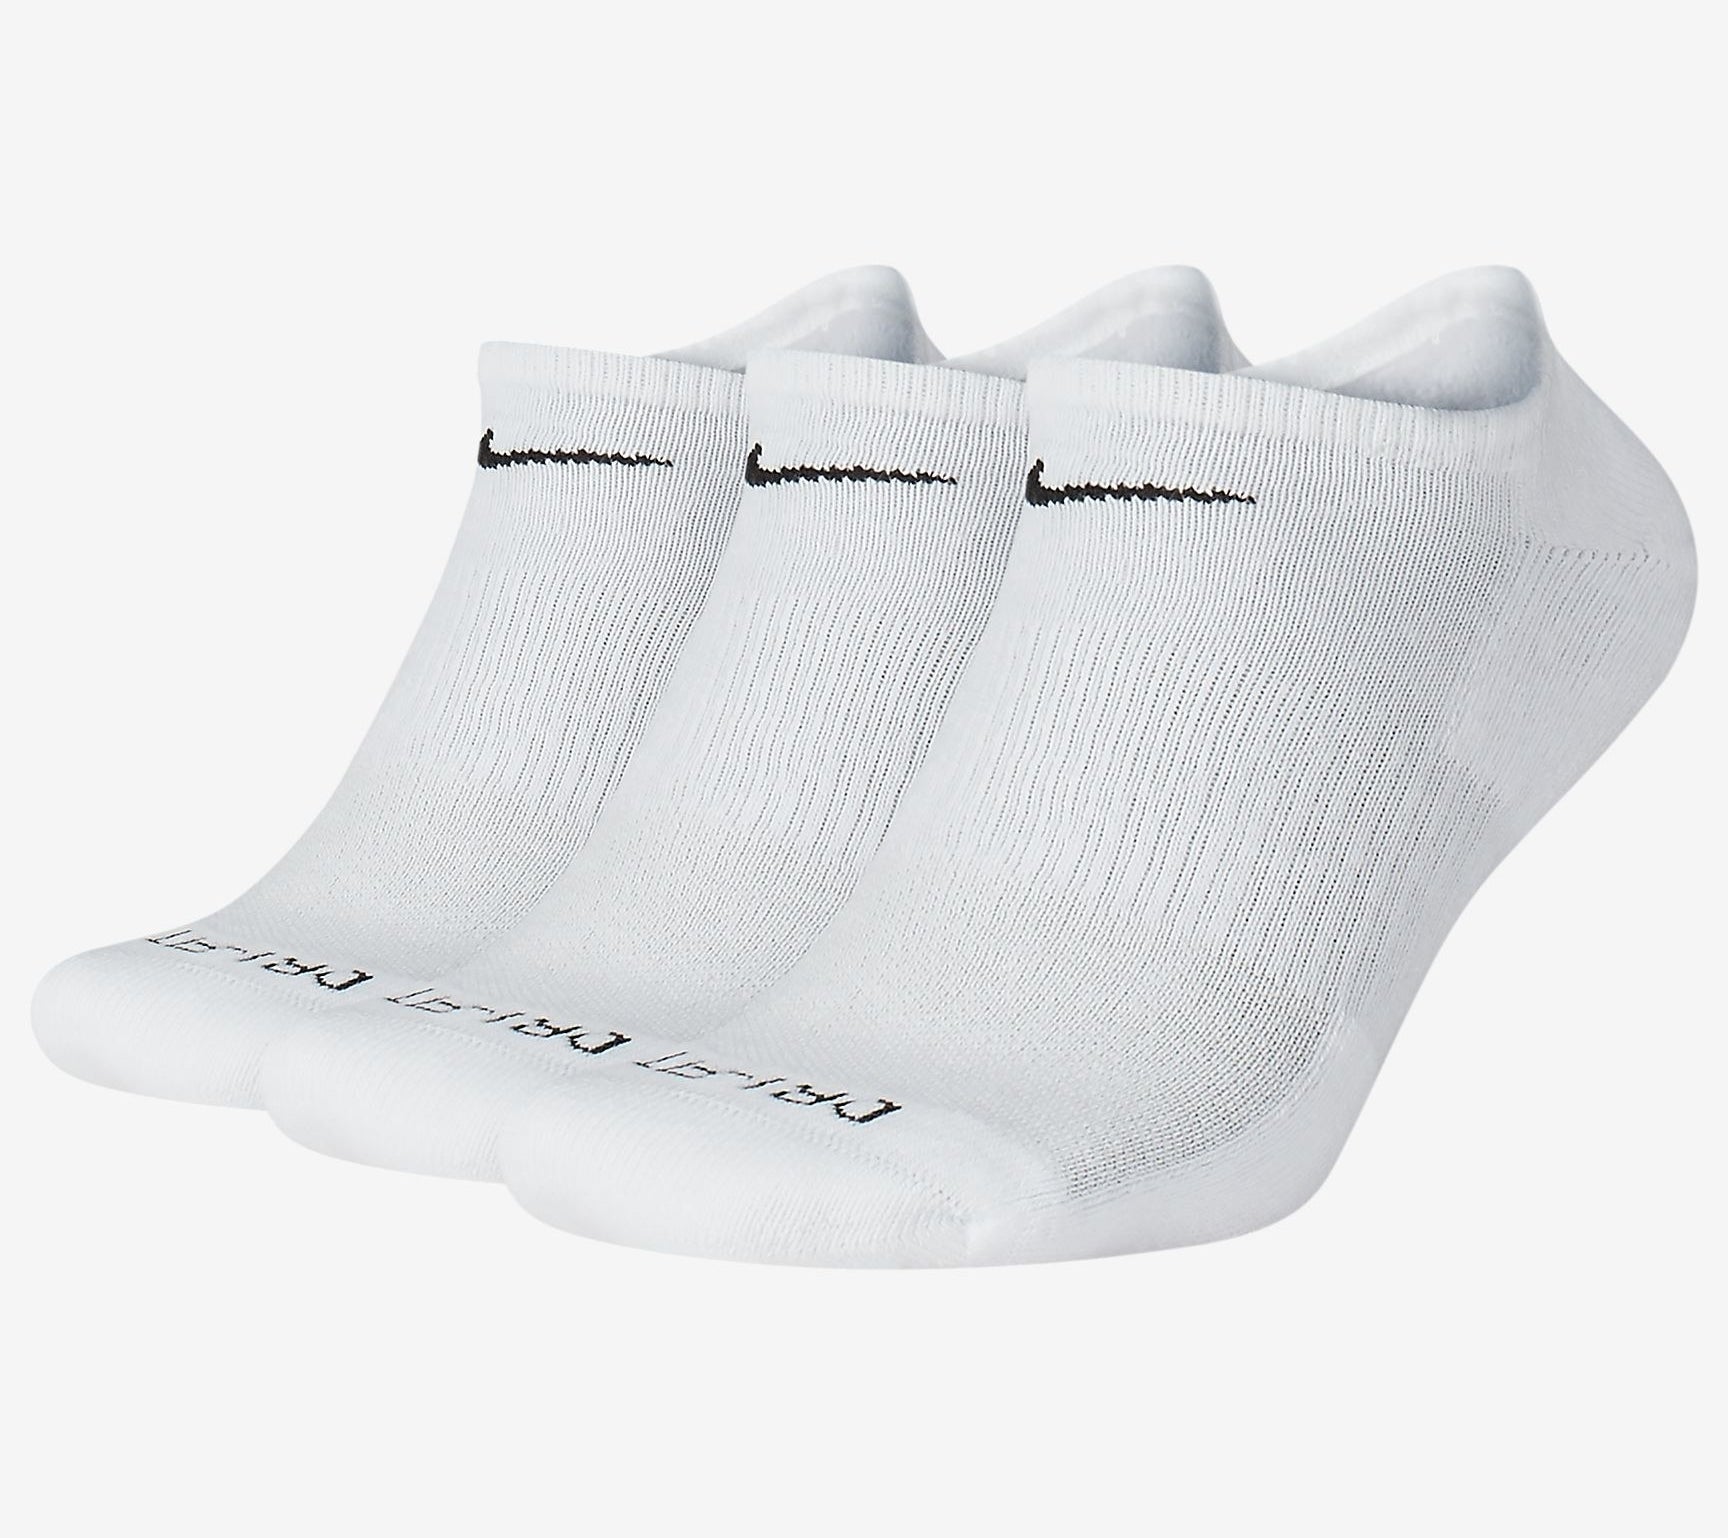 The three socks in white with black Nike logo on the top and Dri-fi on the toe in black